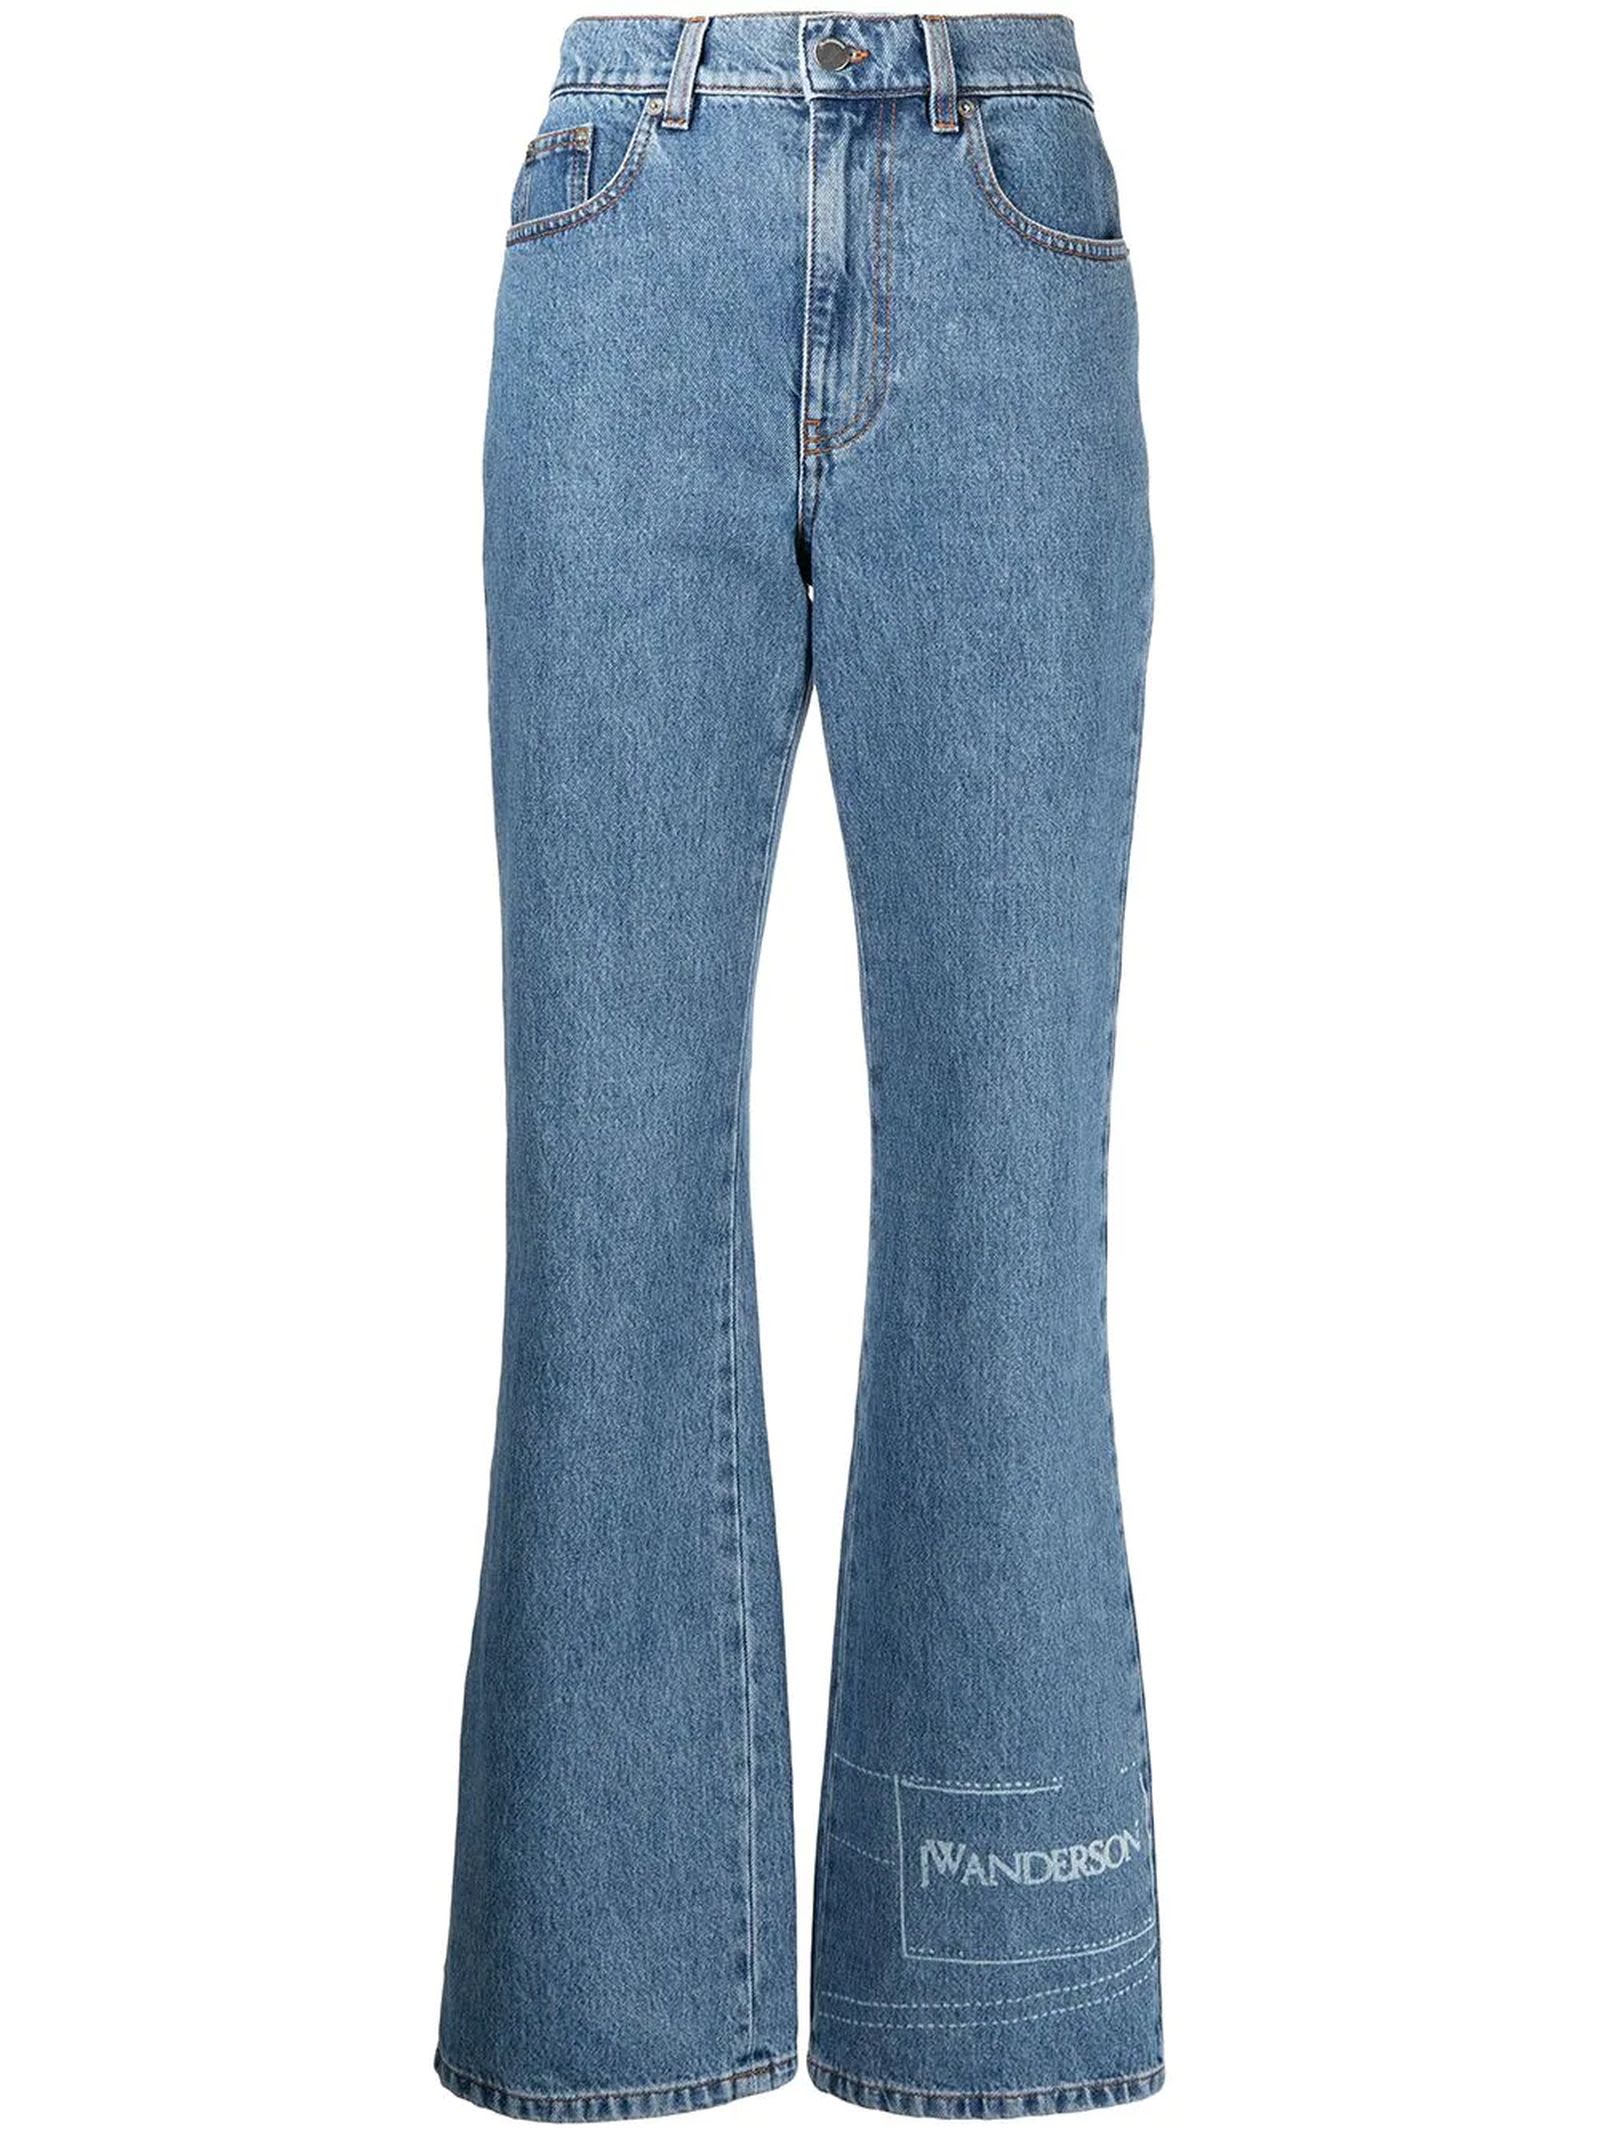 J.W. Anderson Blue Cotton Flared Jeans